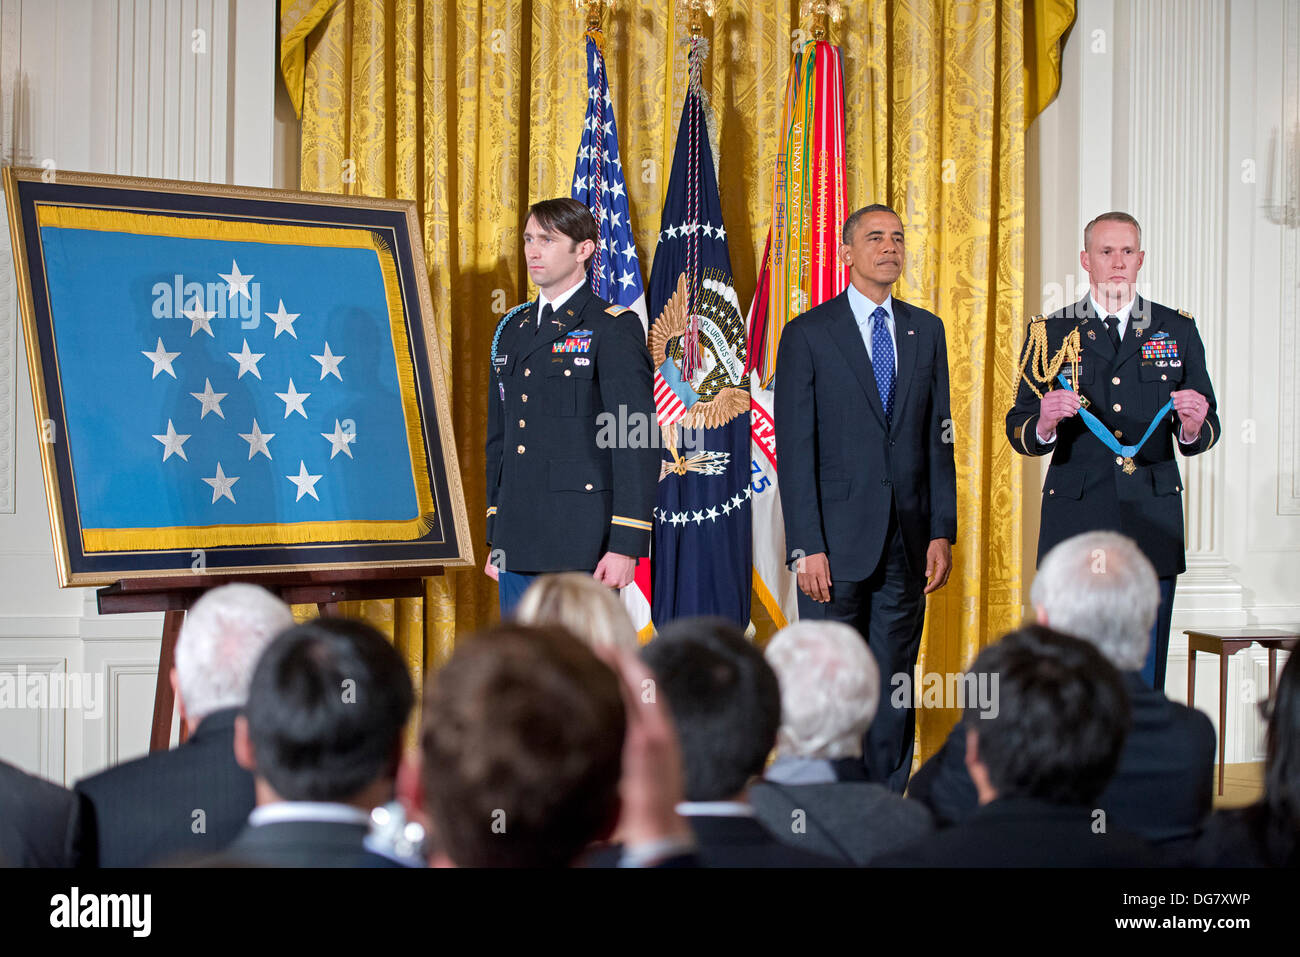 United States President Barack Obama and William Swenson, a former active duty Army Captain, listens as the citation is read prior to Swenson accepting the Medal of Honor for conspicuous gallantry in the East Room of the White House in Washington, DC on October 14, 2013. Captain Swenson accepted the Medal of Honor for his courageous actions while serving as an Embedded Trainer and Mentor of the Afghan National Security Forces with Afghan Border Police Mentor Team, 1st Battalion, 32nd Infantry Regiment, 3rd Brigade Combat Team, 10th Mountain Division, during combat operations in Kunar Provinc Stock Photo